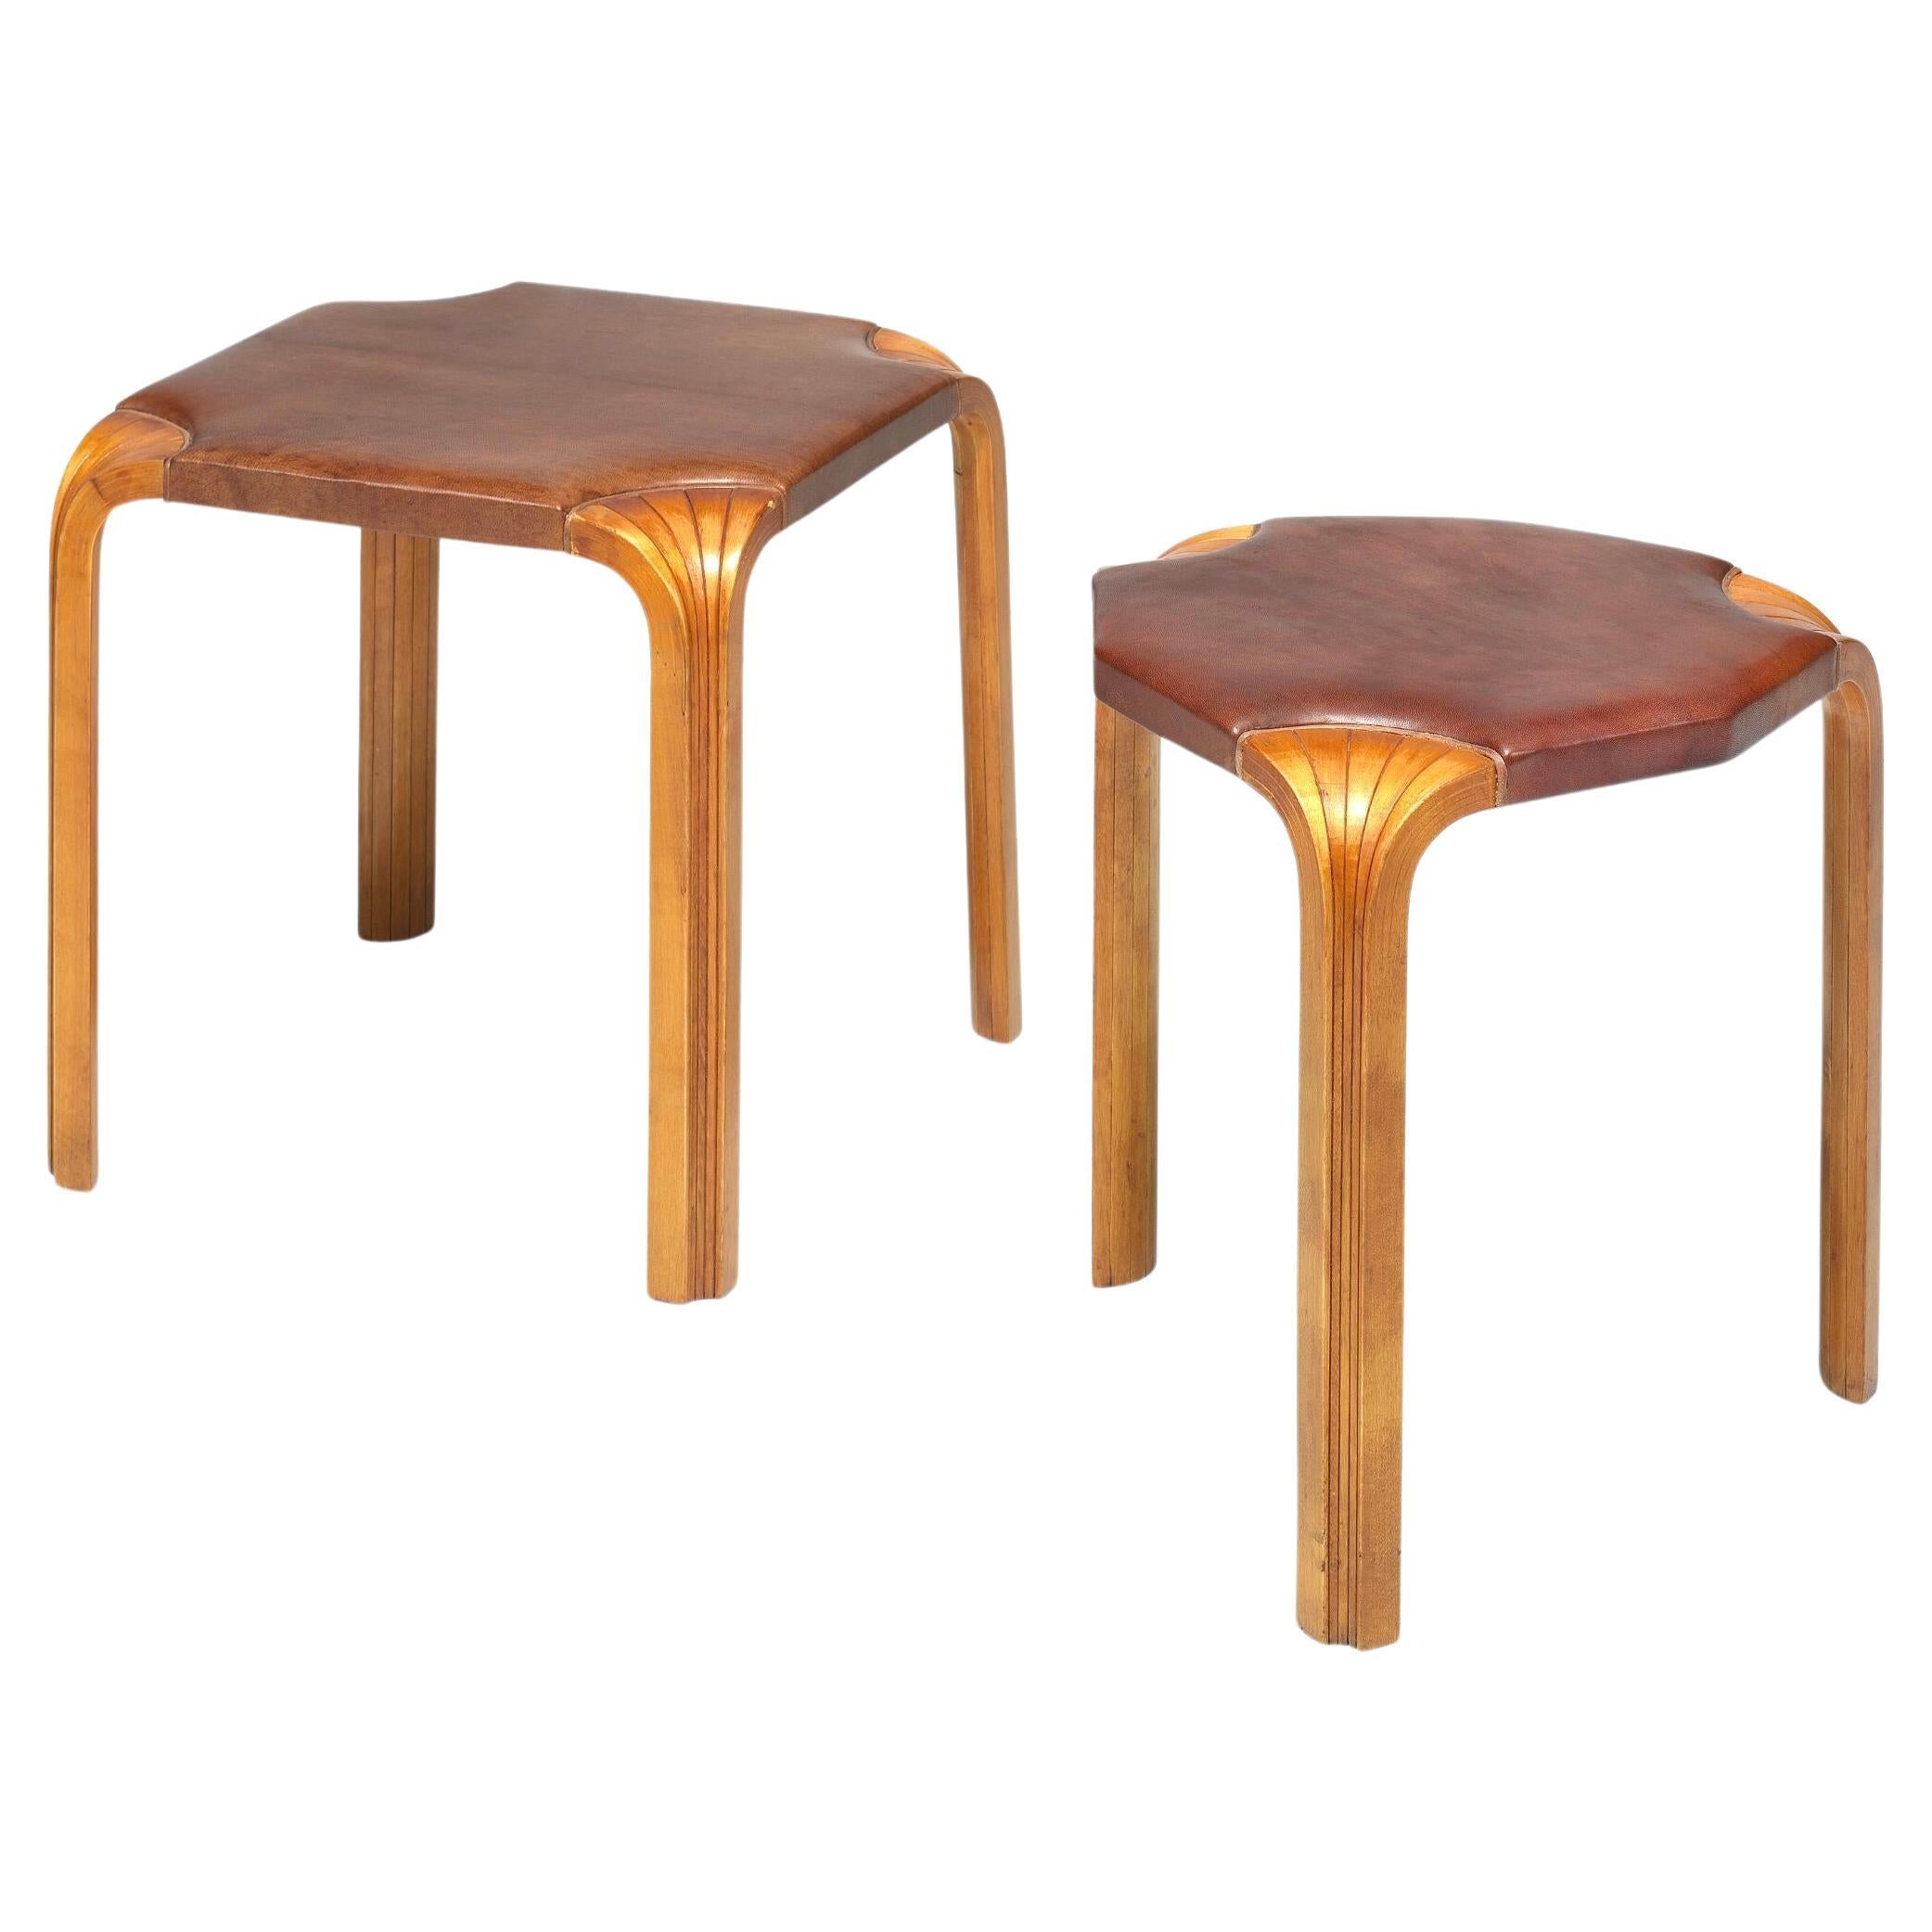 1954 Alvar Aalto stool model X601 & X602 in patinated birch and Niger leather